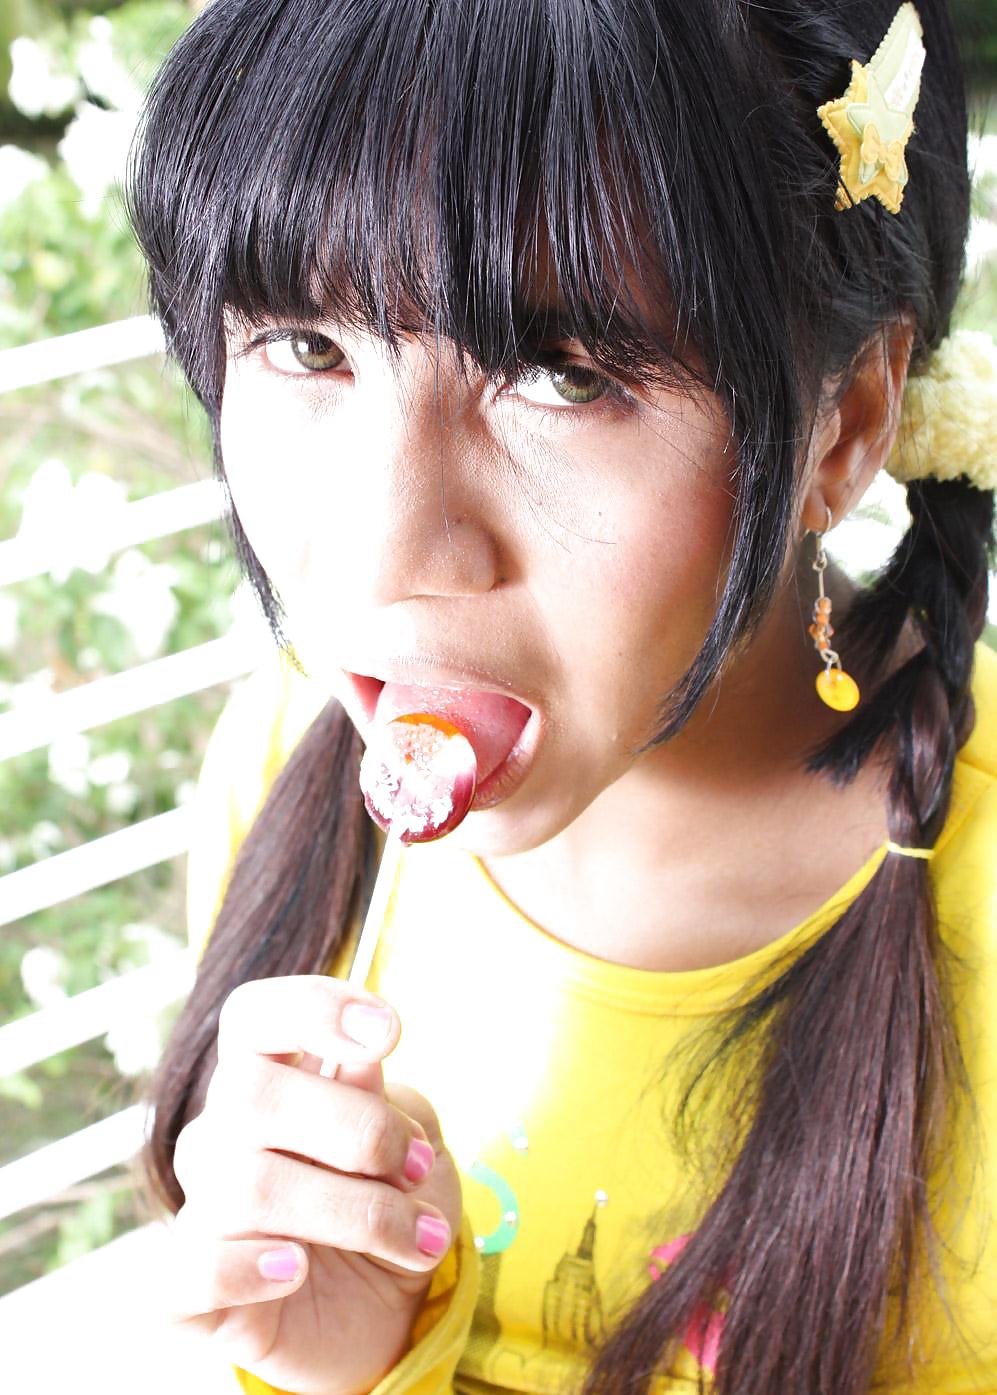 Charming Tobie - Licking a lollypop #3789415